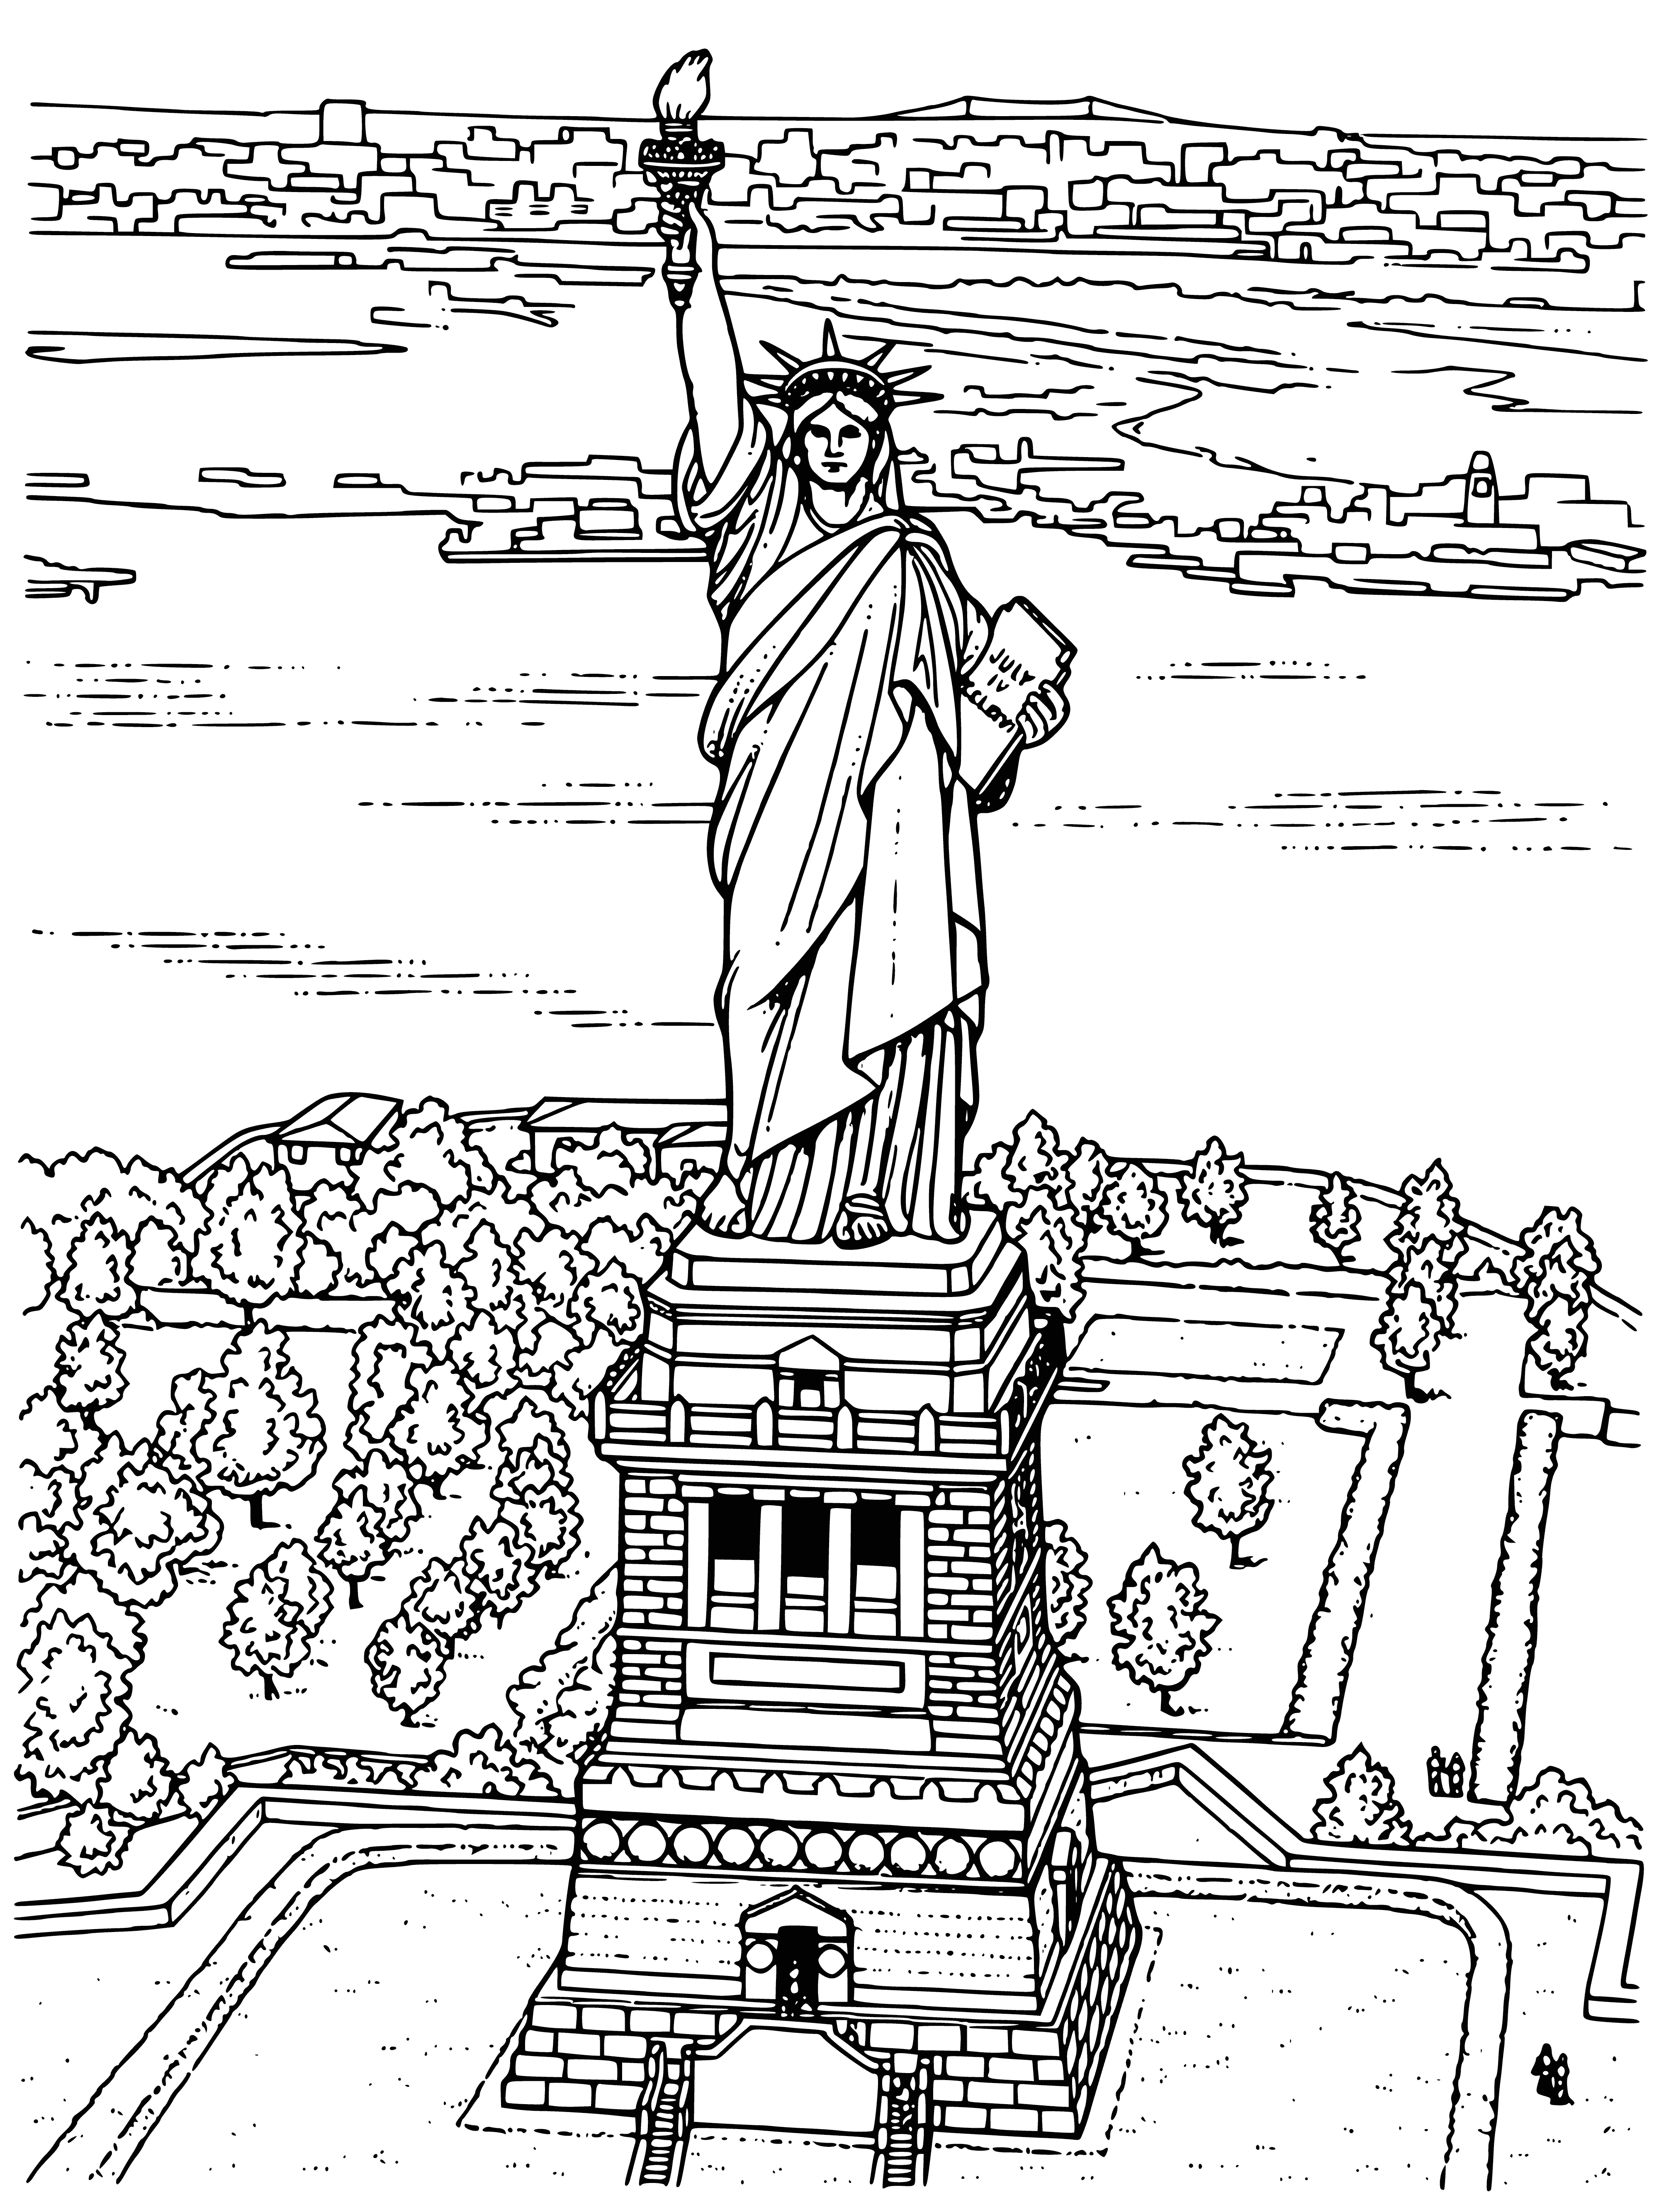 coloring page: Statue of Liberty stands in New York Harbor w/ boats, looking at the NYC skyline of tall buildings against a blue sky.